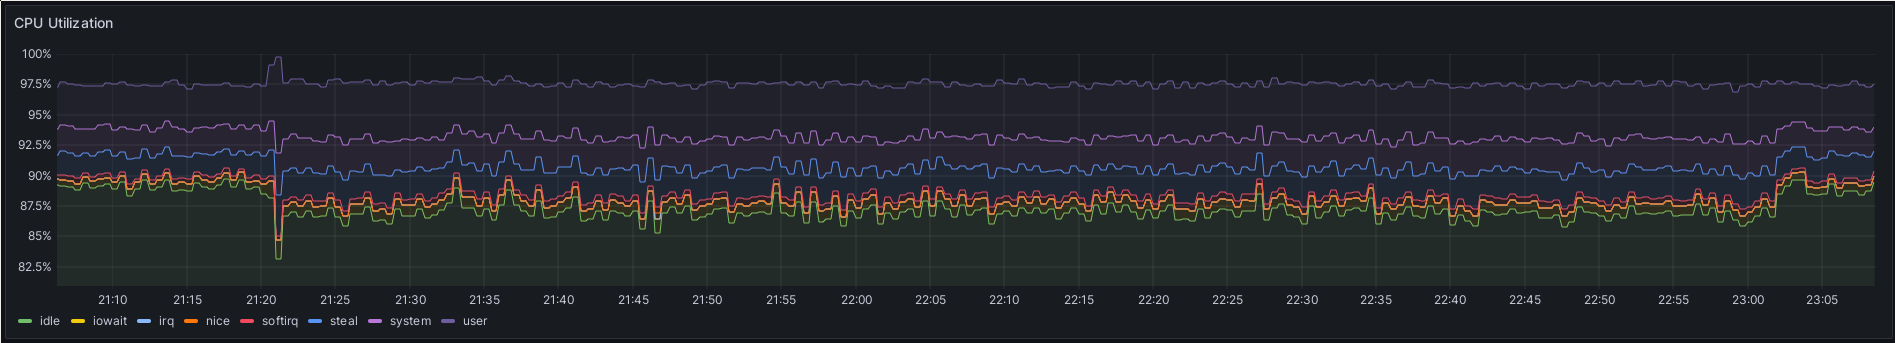 A screenshot of a Grafana plot, titled 'CPU Utilization'. The y axis shows CPU utilization in percent, going from 82% at the bottom to 100% at the top. The x axis shows time, from 21:05 to 23:10. At the beginning, the plot shows about 89% idle load for the CPU. At around 21:20, the idle load is reduced to about 87% idle. This level of load is held until about 23:03, when the idle load increases back to about 88%.